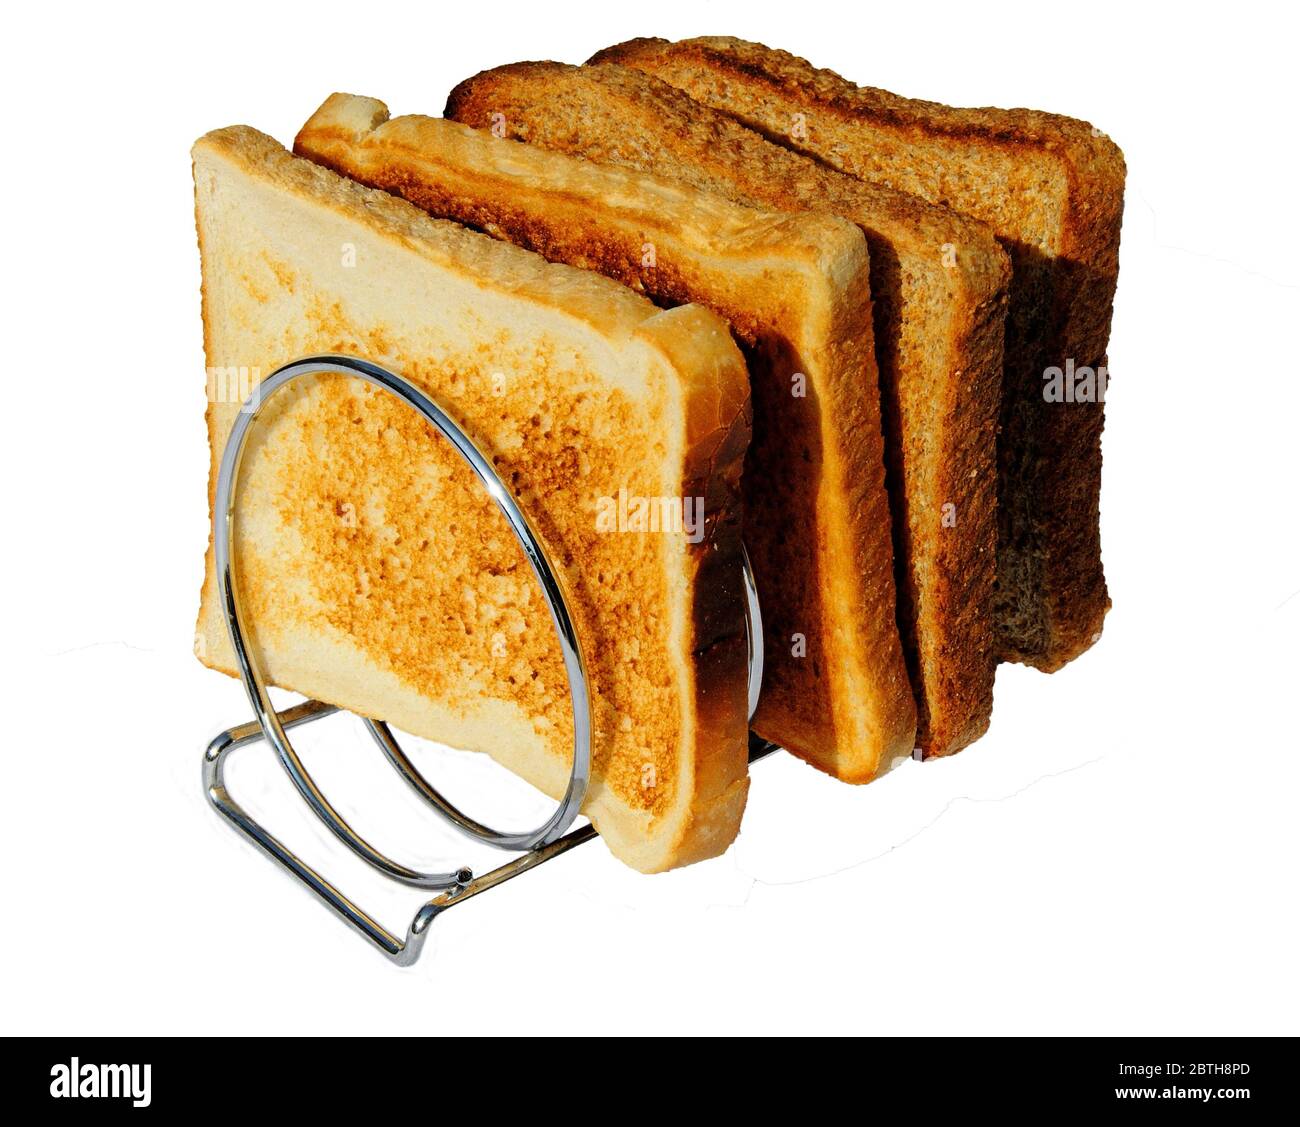 https://c8.alamy.com/comp/2BTH8PD/four-slices-of-toast-in-a-metal-coiled-toast-rack-2BTH8PD.jpg